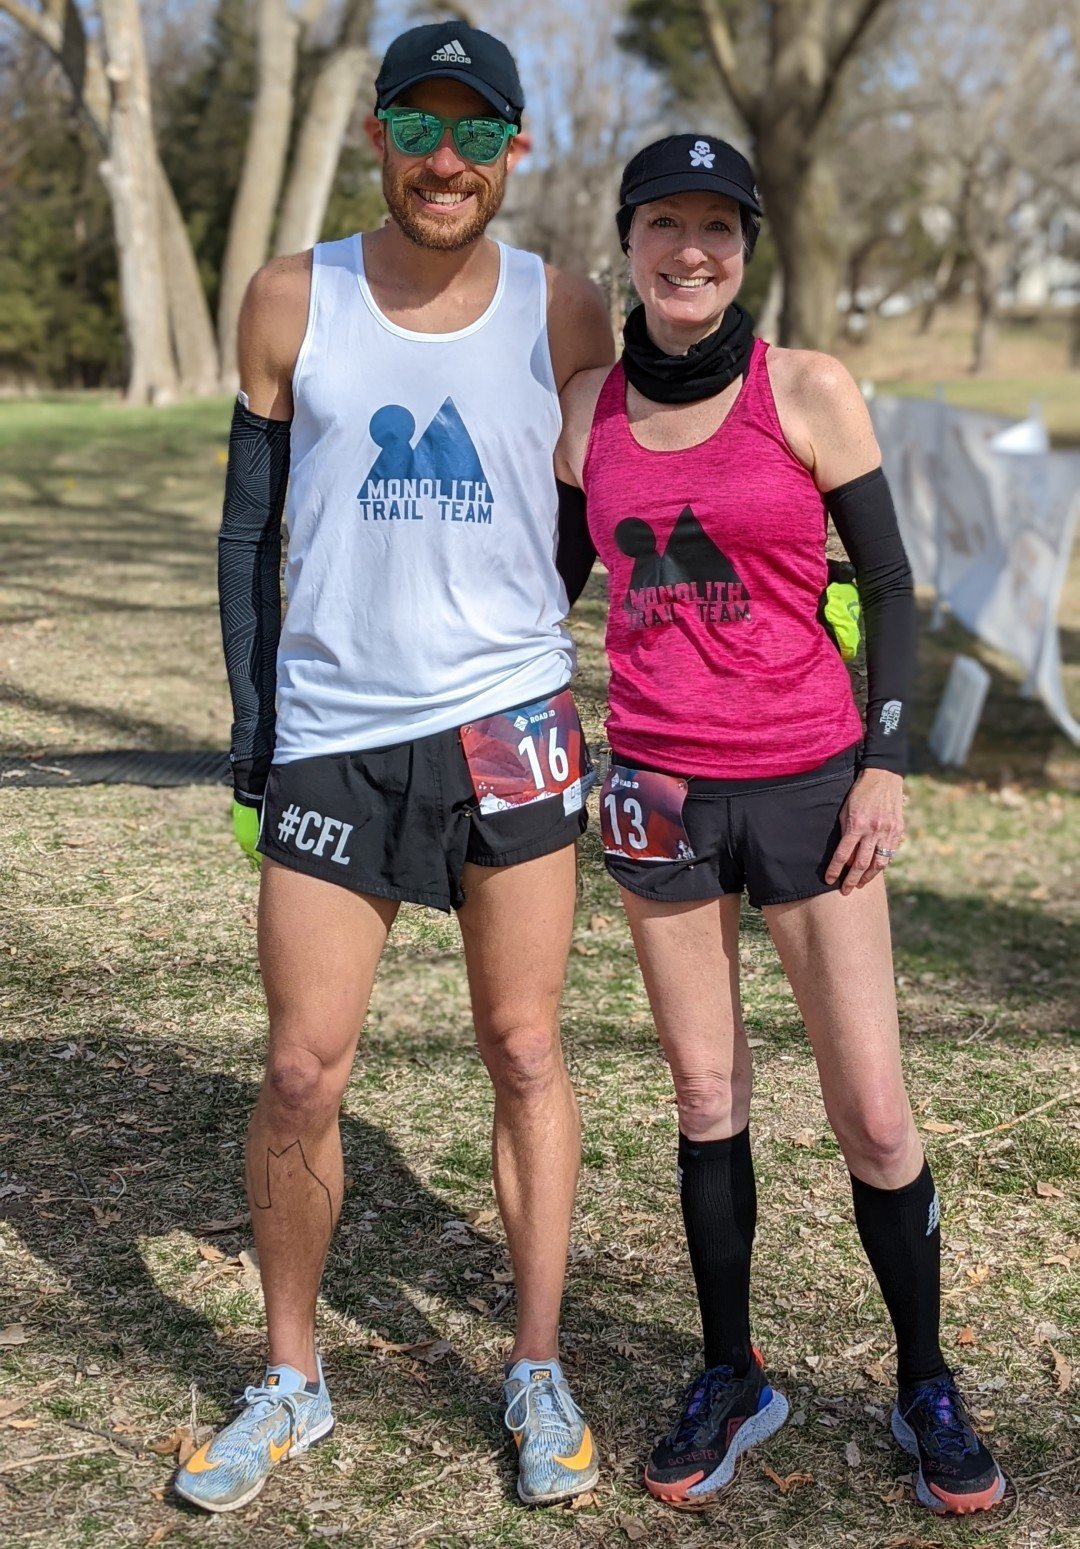 cory logsdon and emily langdon pose for a photo after the tails n trails half marathon in omaha nebraska